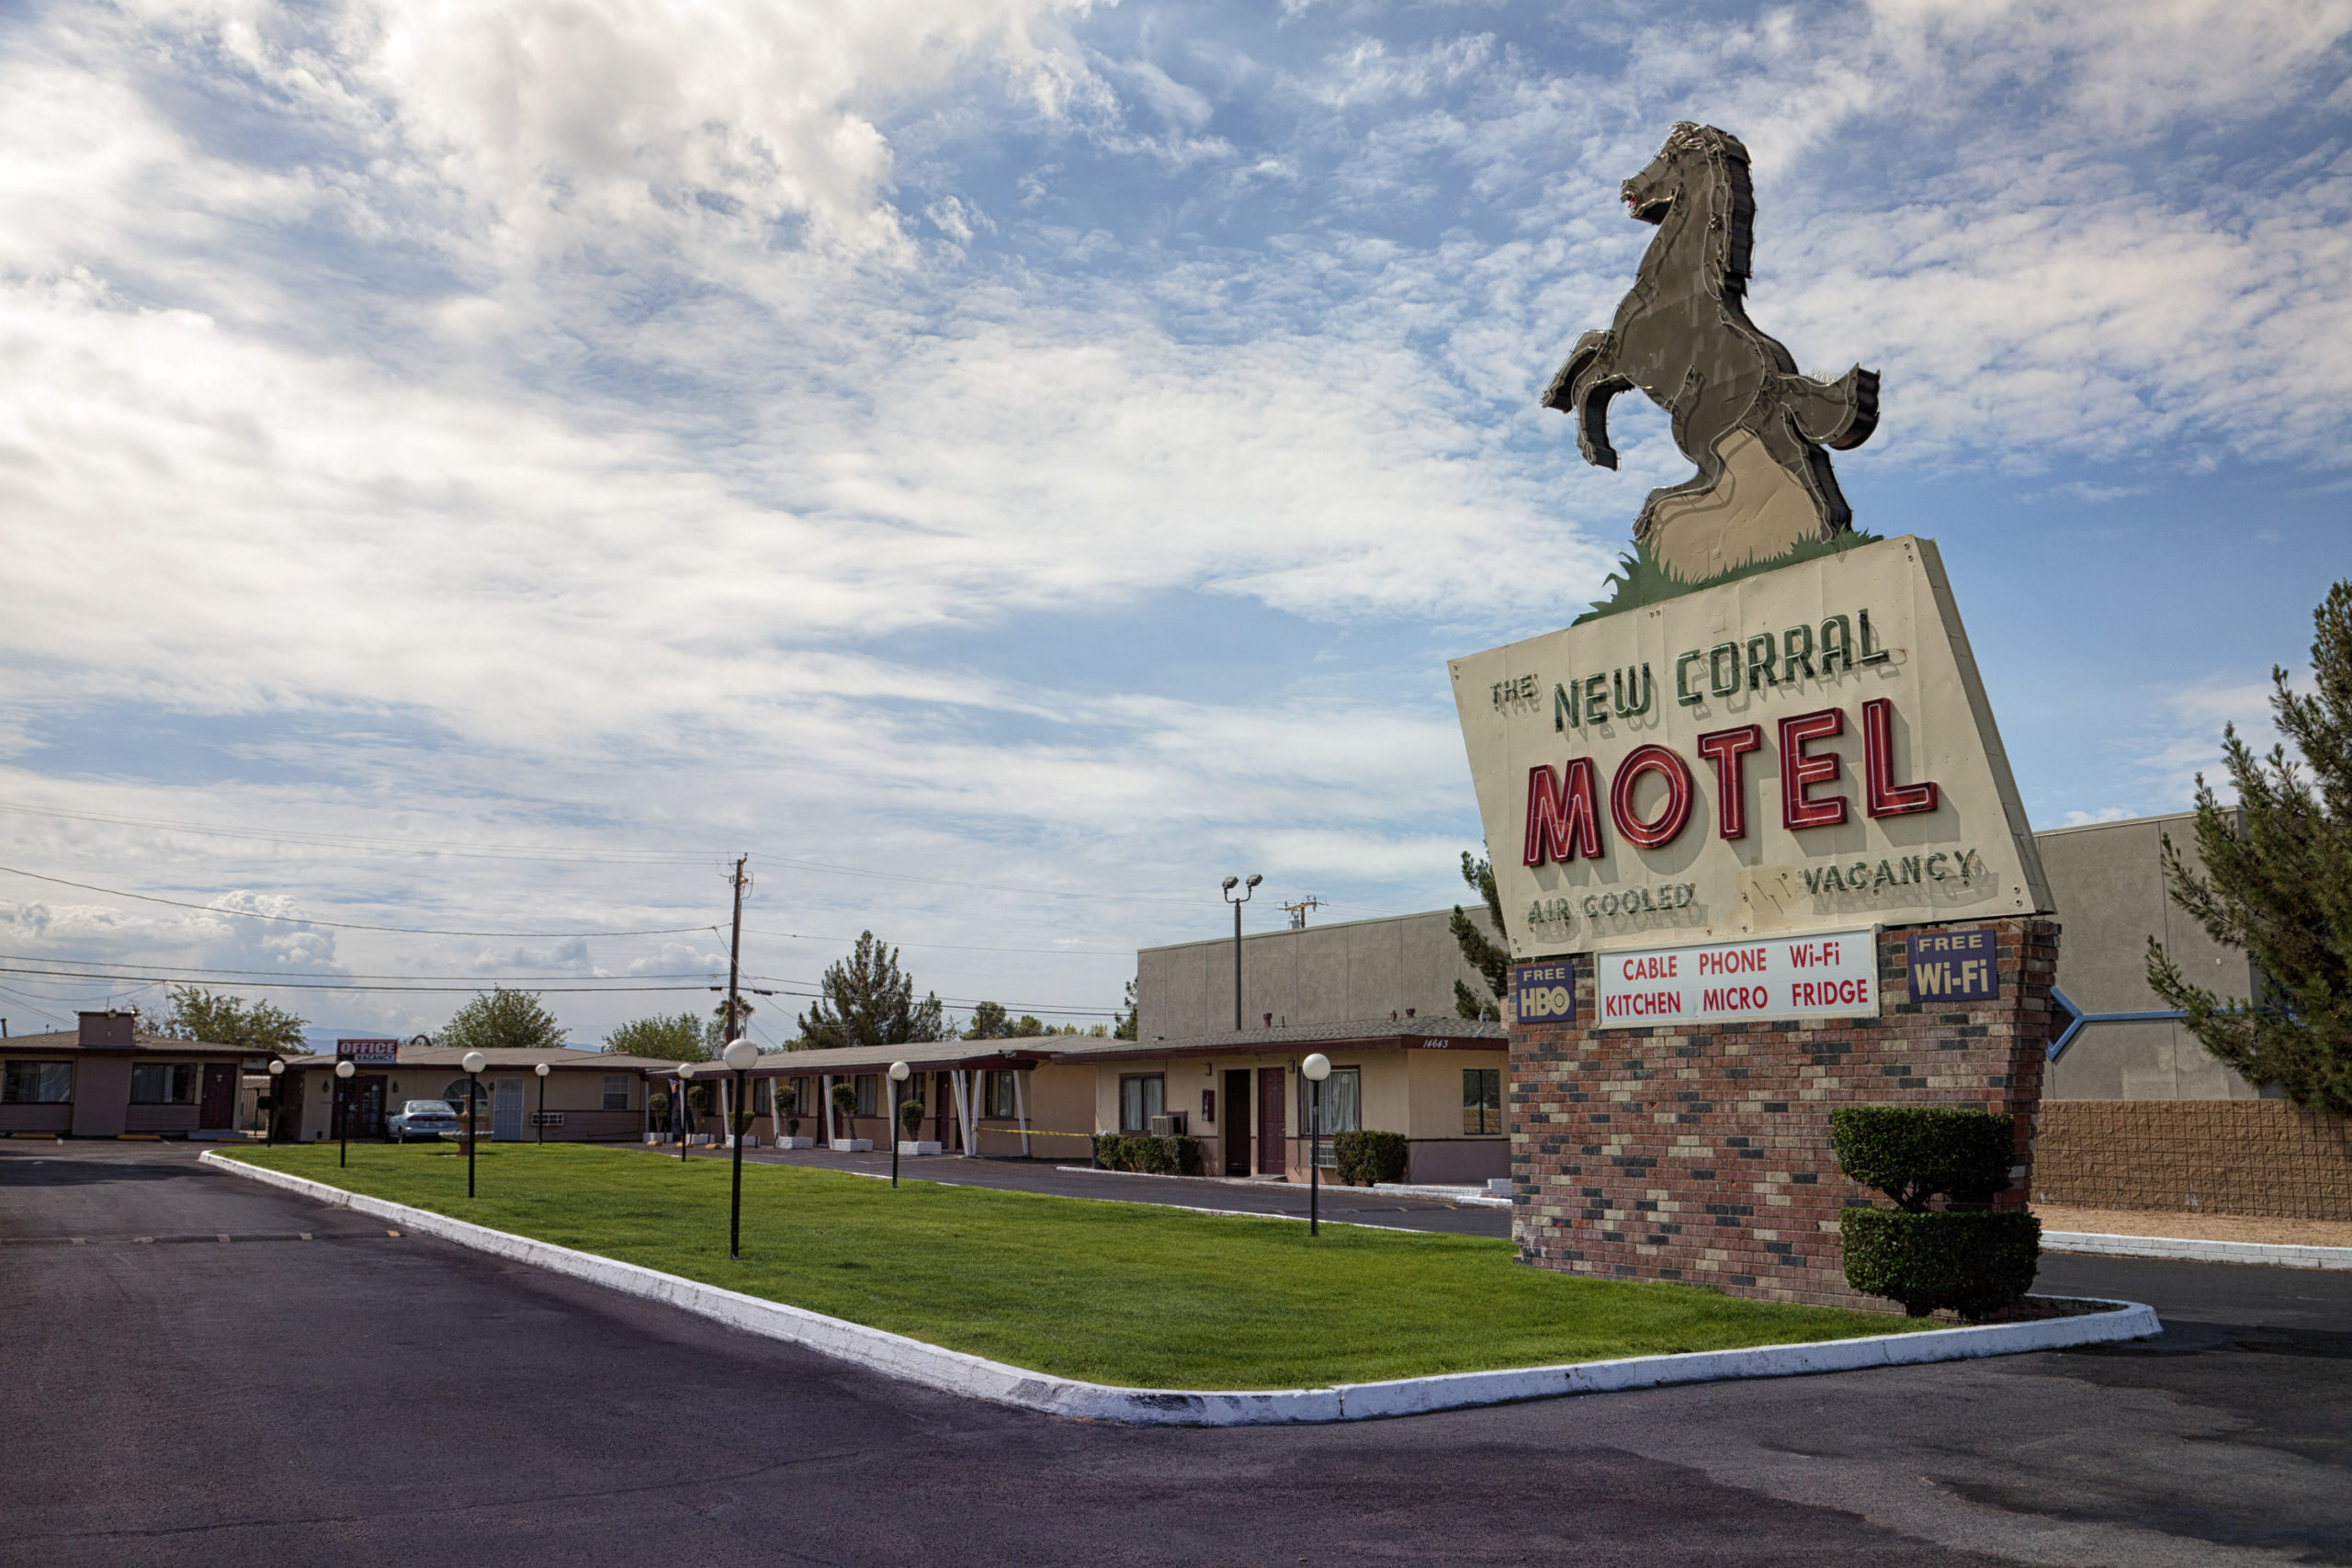 The New Corral Motel - Route 66